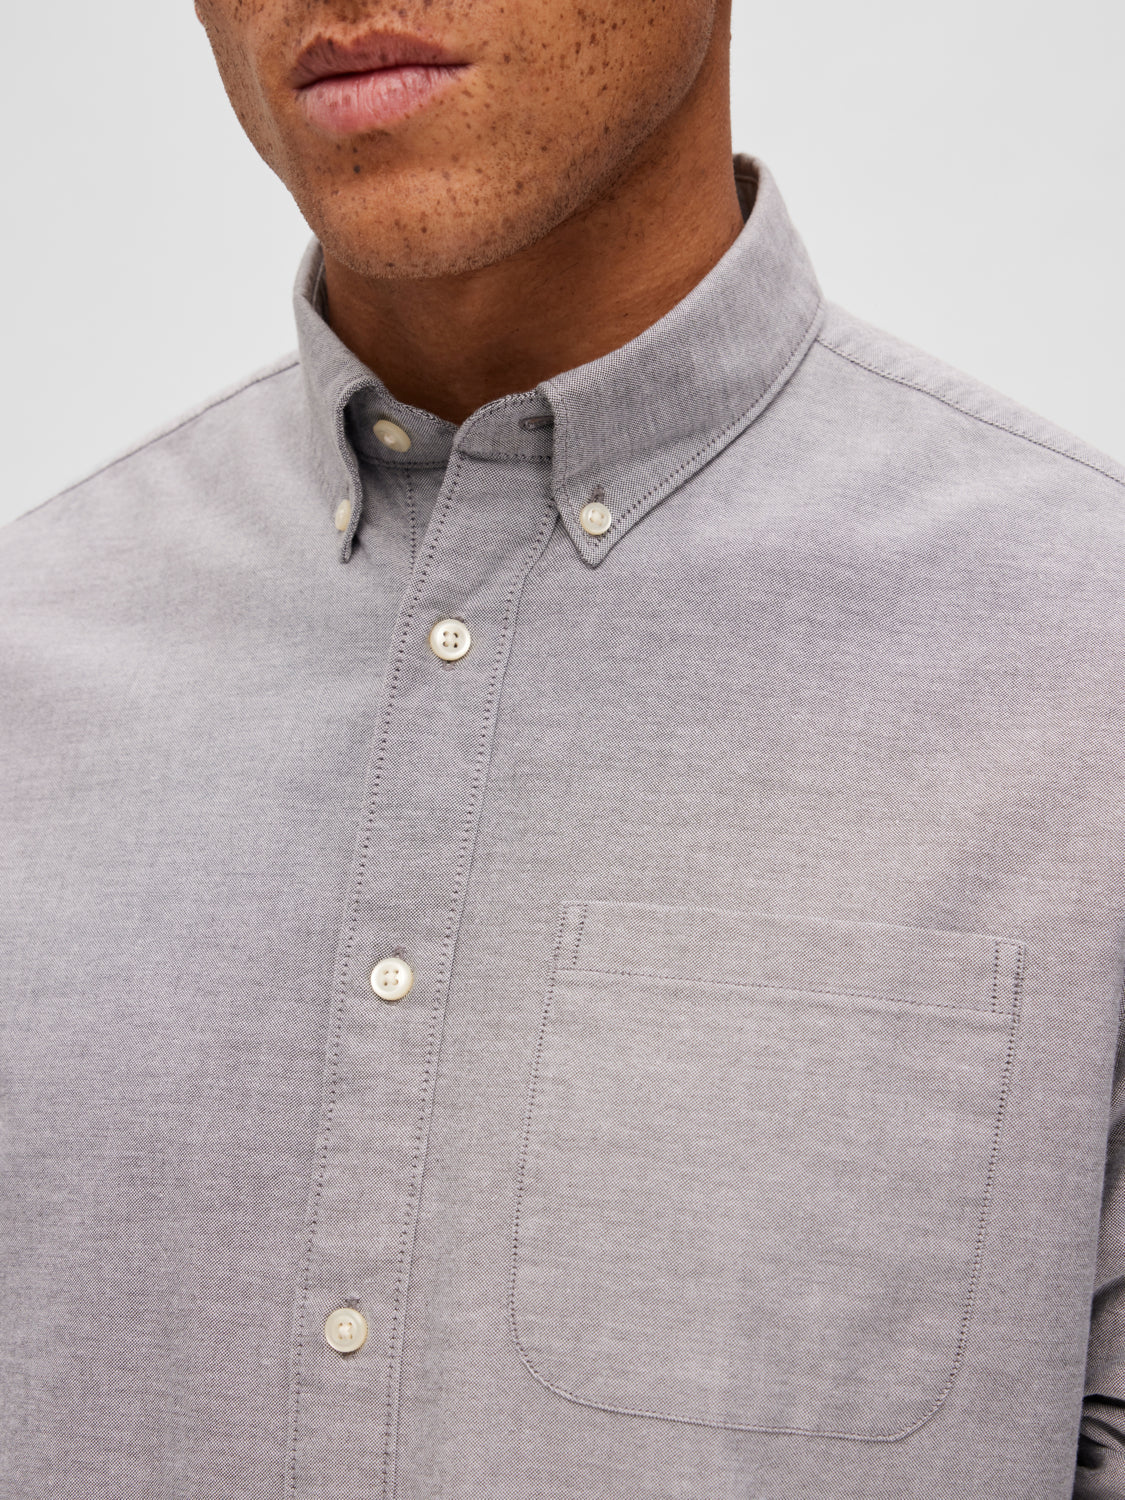 SELECTED HOMME - REG RICK-OX Shirts - Pirate Black